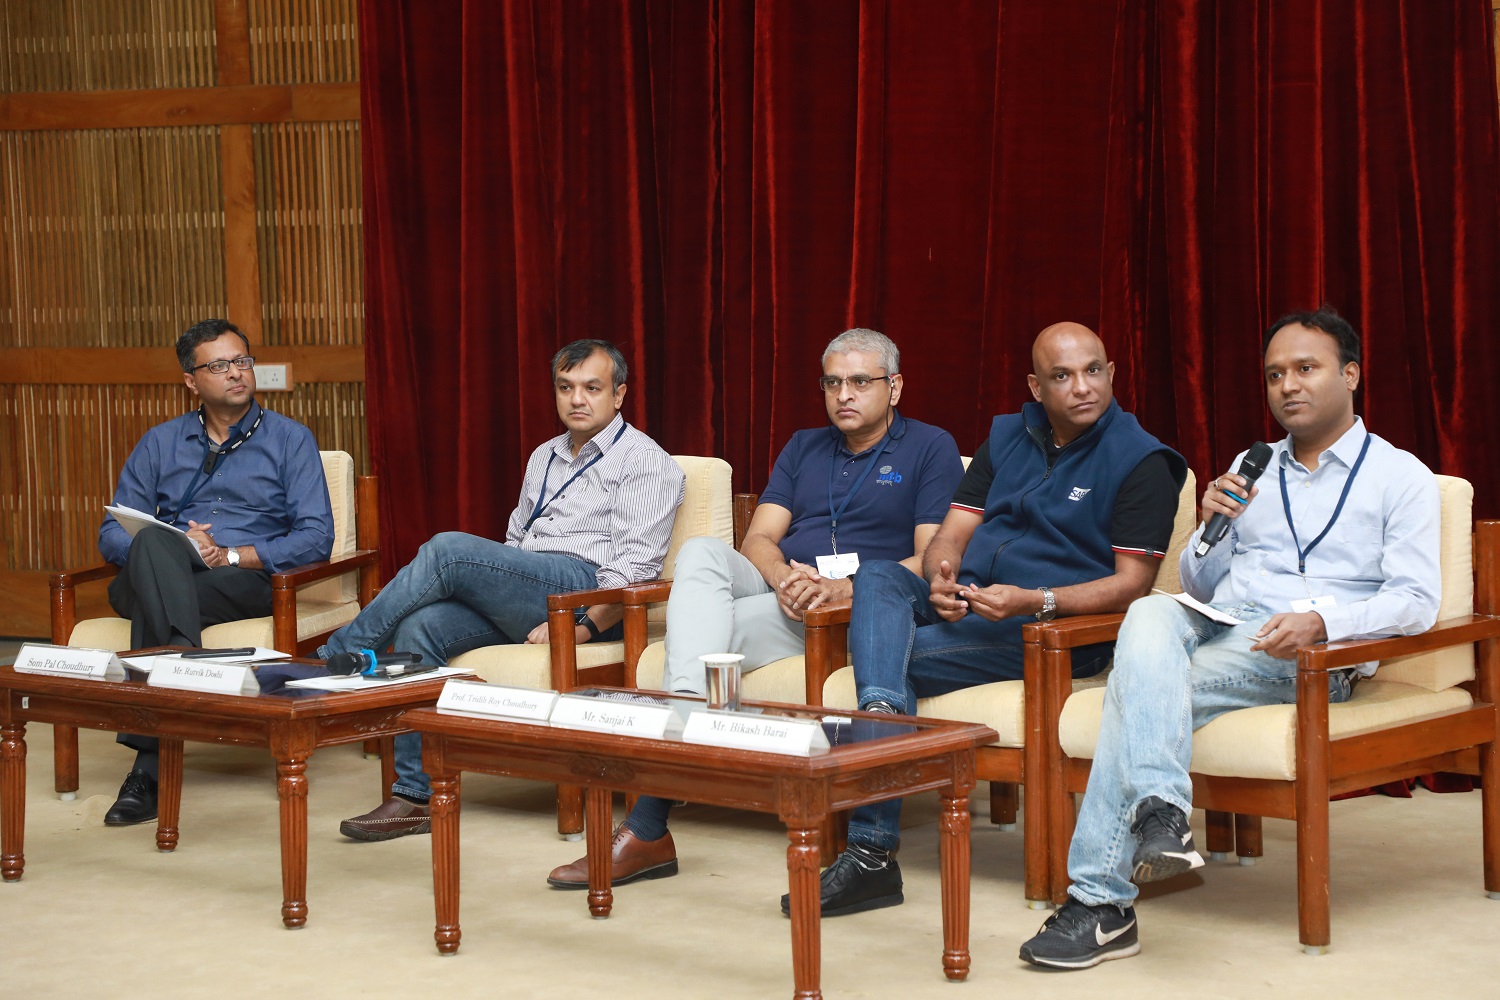 (L-R) Somshubhro (Som) Pal Choudhury, Partner, Bharat Innovation Fund; Rutvik Doshi, Managing Director at Inventus Capital Partners; Prof. Tridib Roy Choudhury, Chief Program Officer, MINRO, IIIT Bangalore; Sanjai K, VP, SAP Labs India, and Bikash Barai, Co-Founder, FireCompass, at the panel discussion on ‘Start-up and Growth Perspective of Product Management’.